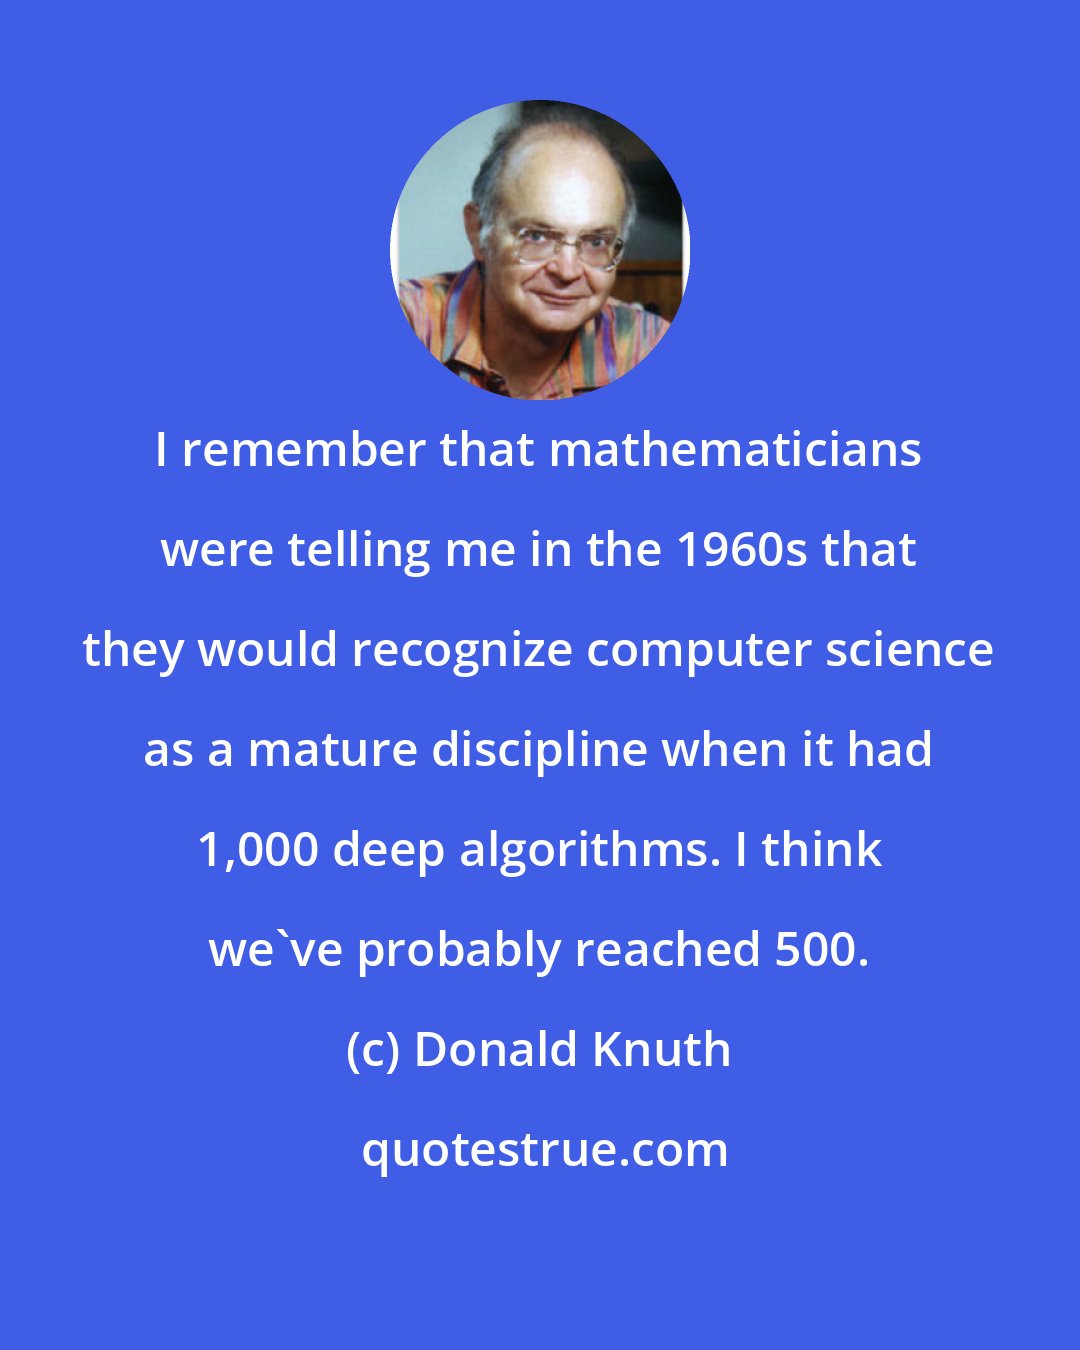 Donald Knuth: I remember that mathematicians were telling me in the 1960s that they would recognize computer science as a mature discipline when it had 1,000 deep algorithms. I think we've probably reached 500.